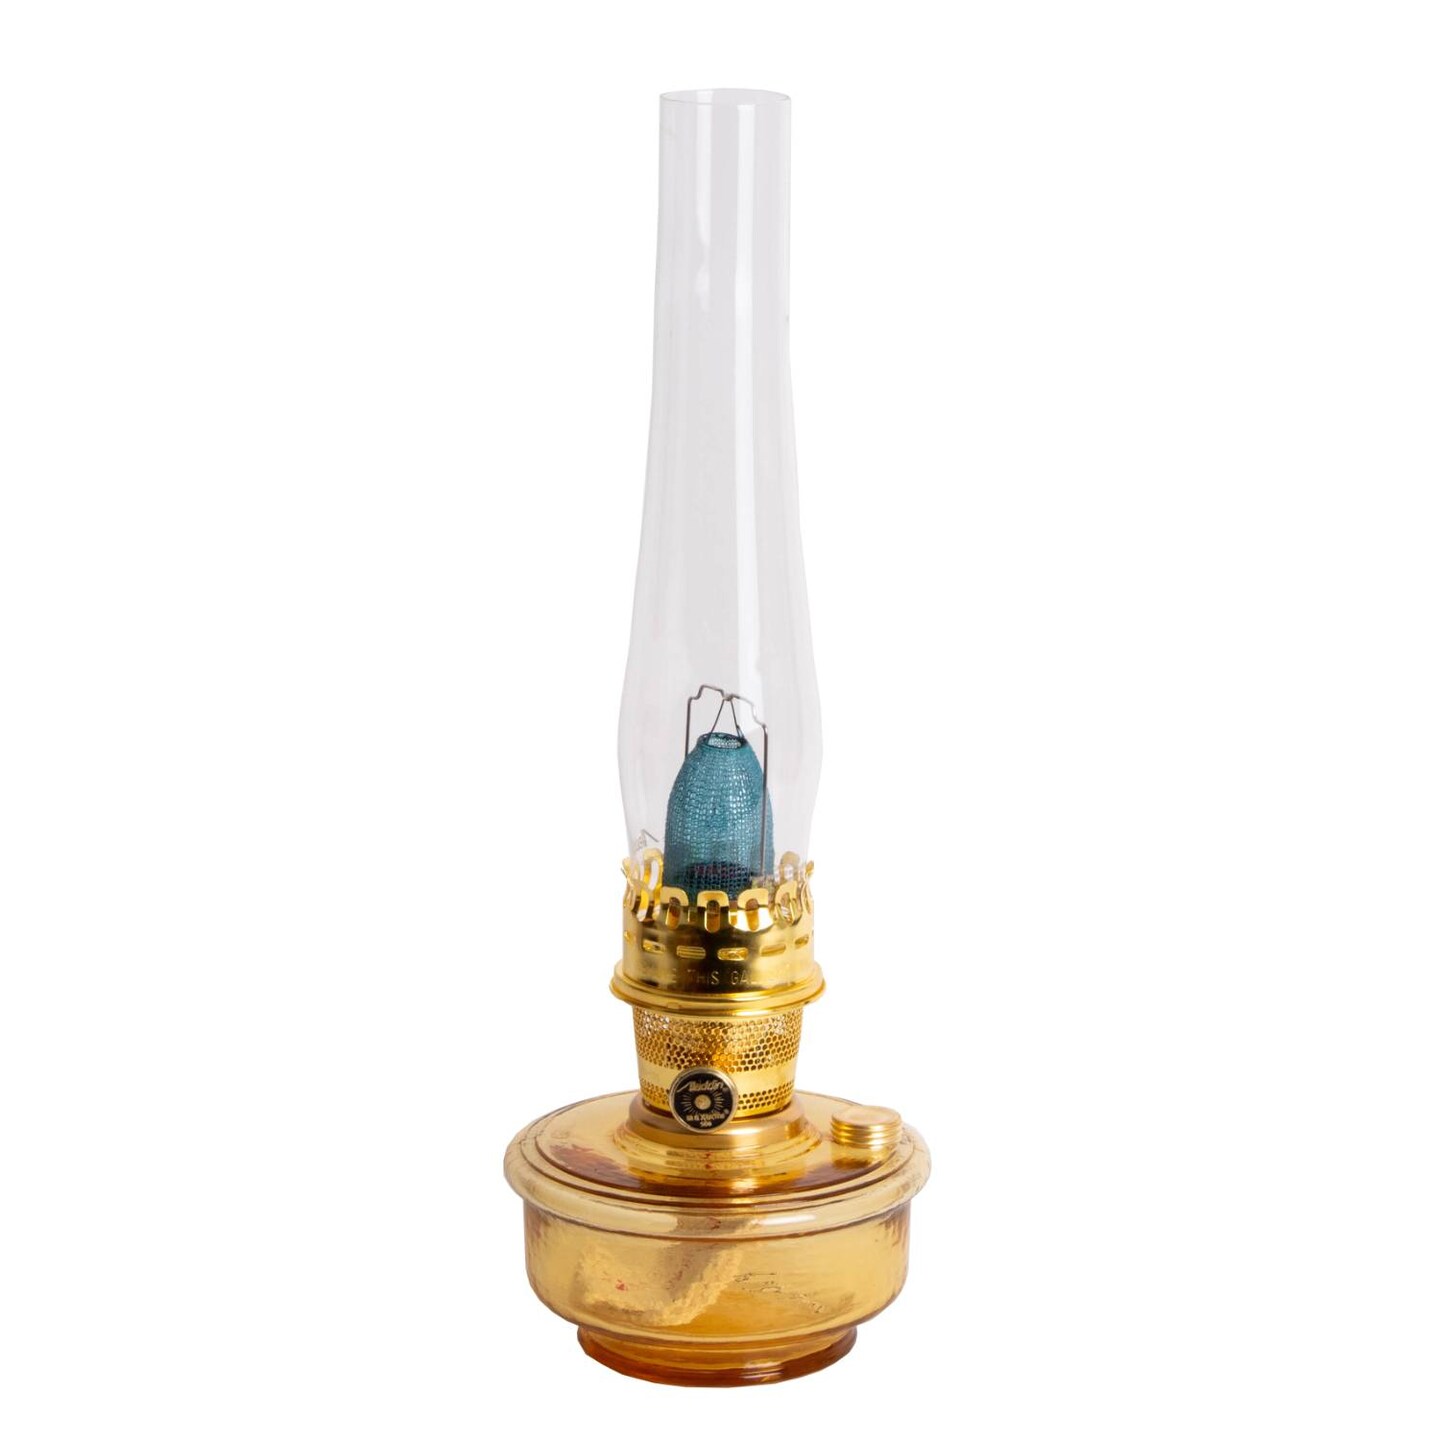 Aladdin Genie III Oil Lamp, Indoor Emergency Lighting for Shelf, Table or Hanging, Glass Bowl with Brass or Nickel Burner